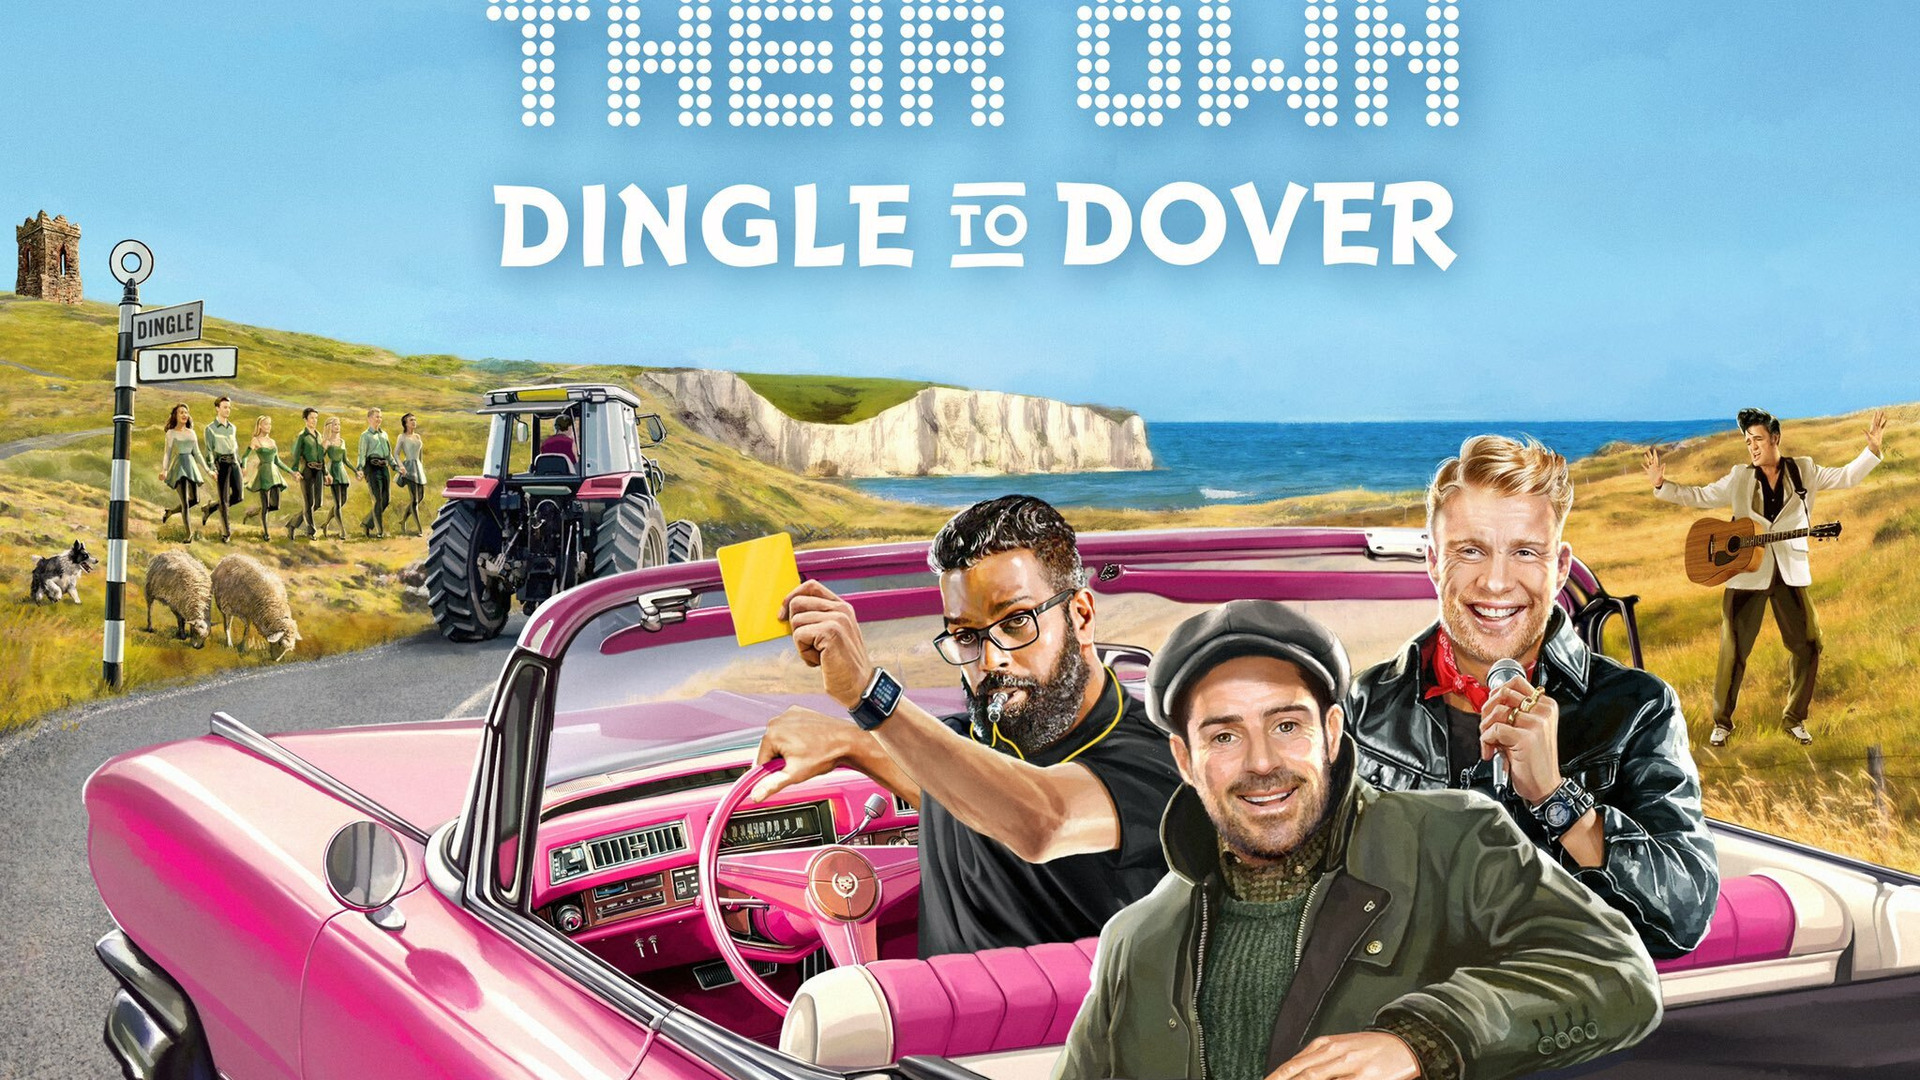 Show A League of Their Own Road Trip: Dingle to Dover